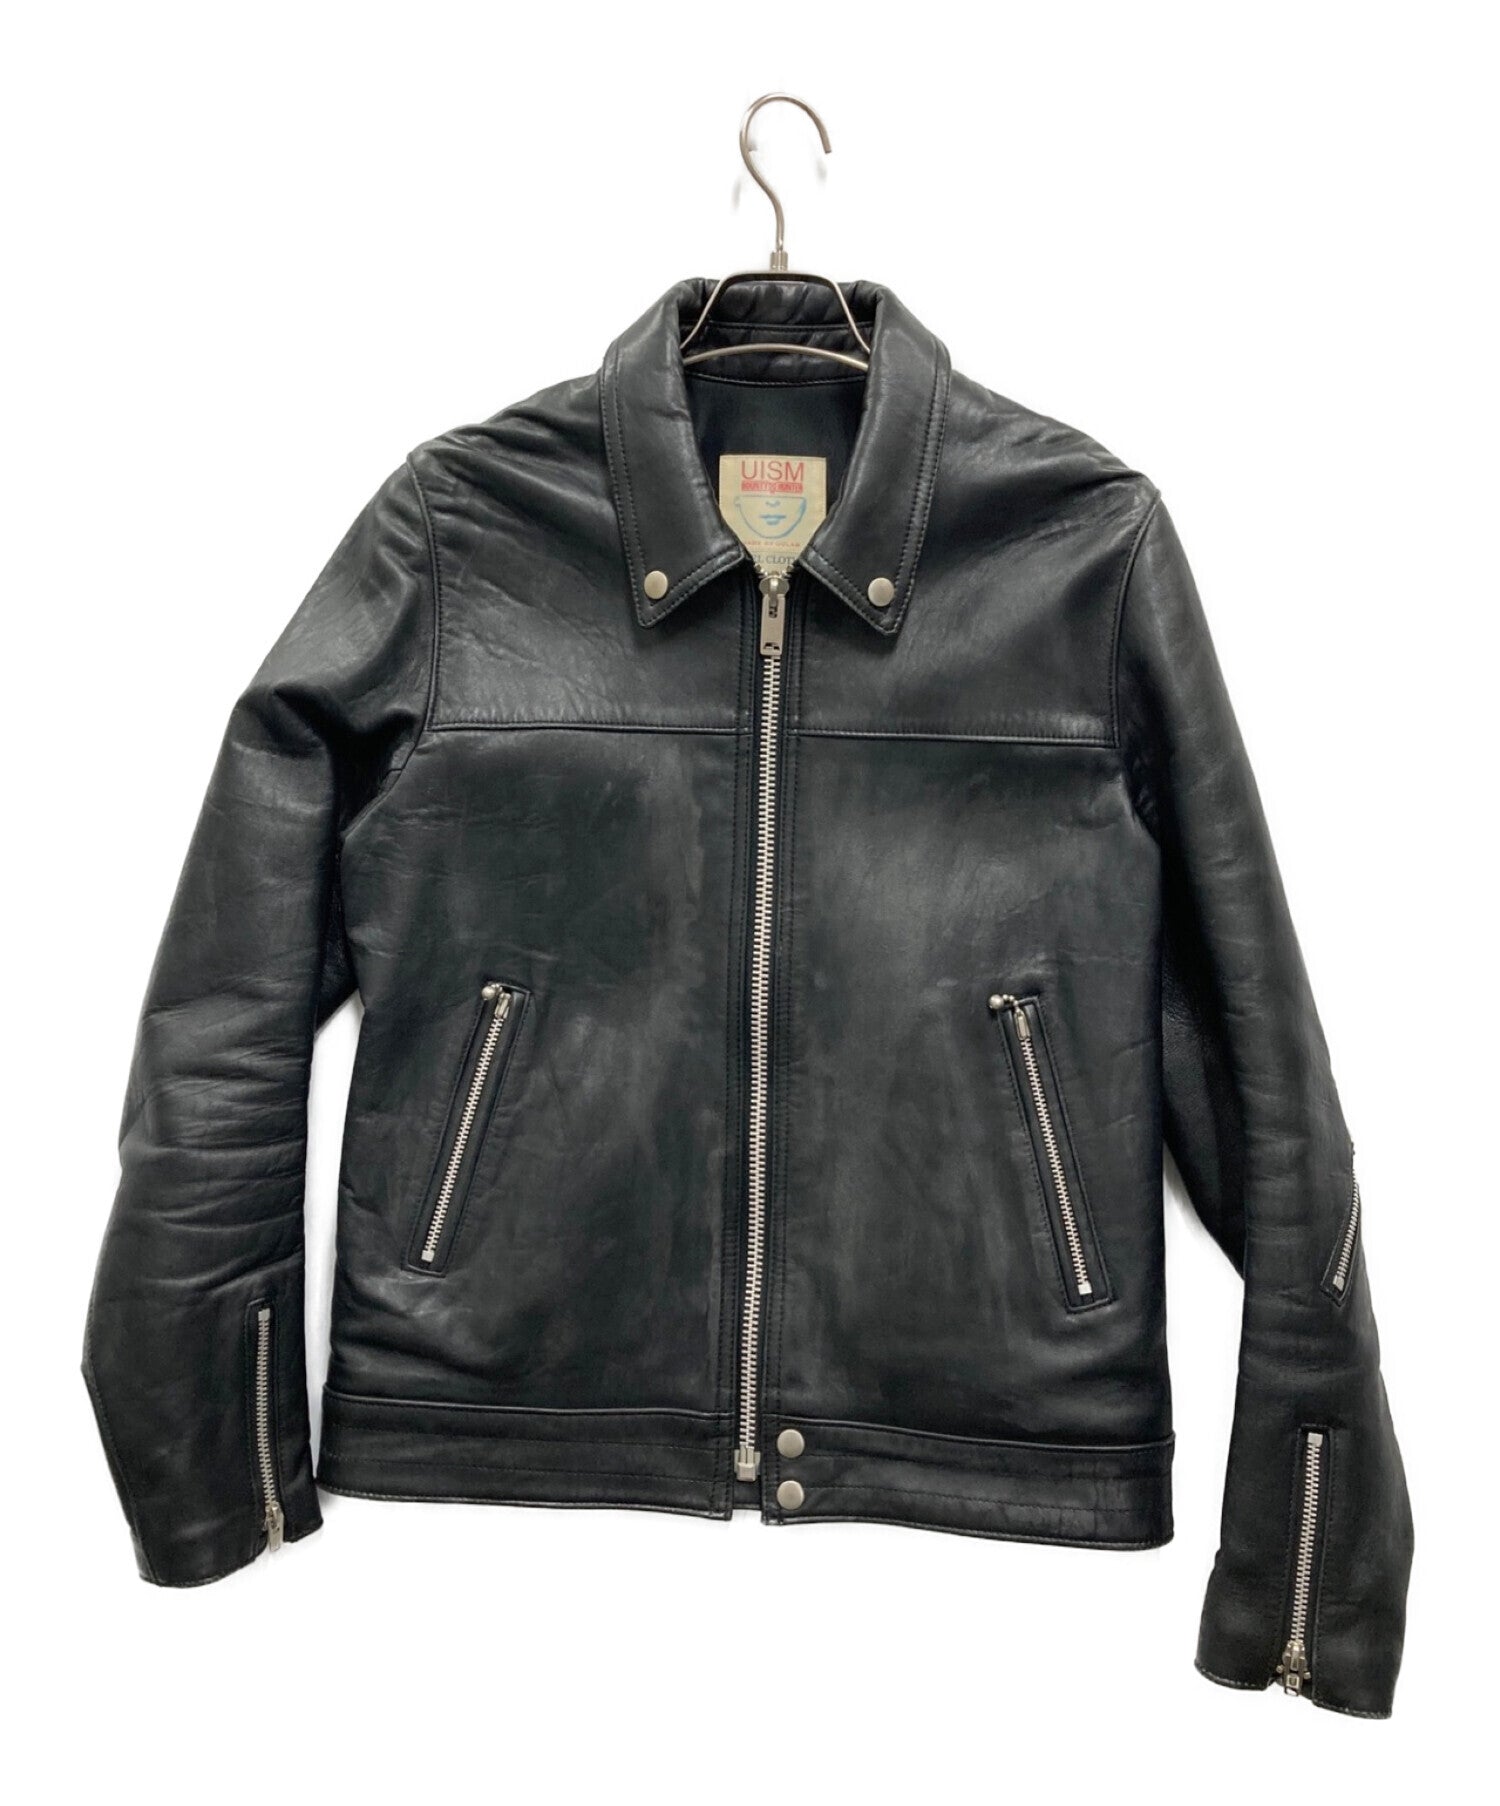 Pre-owned] UNDERCOVERISM UISM Leather single riders jacket G9201